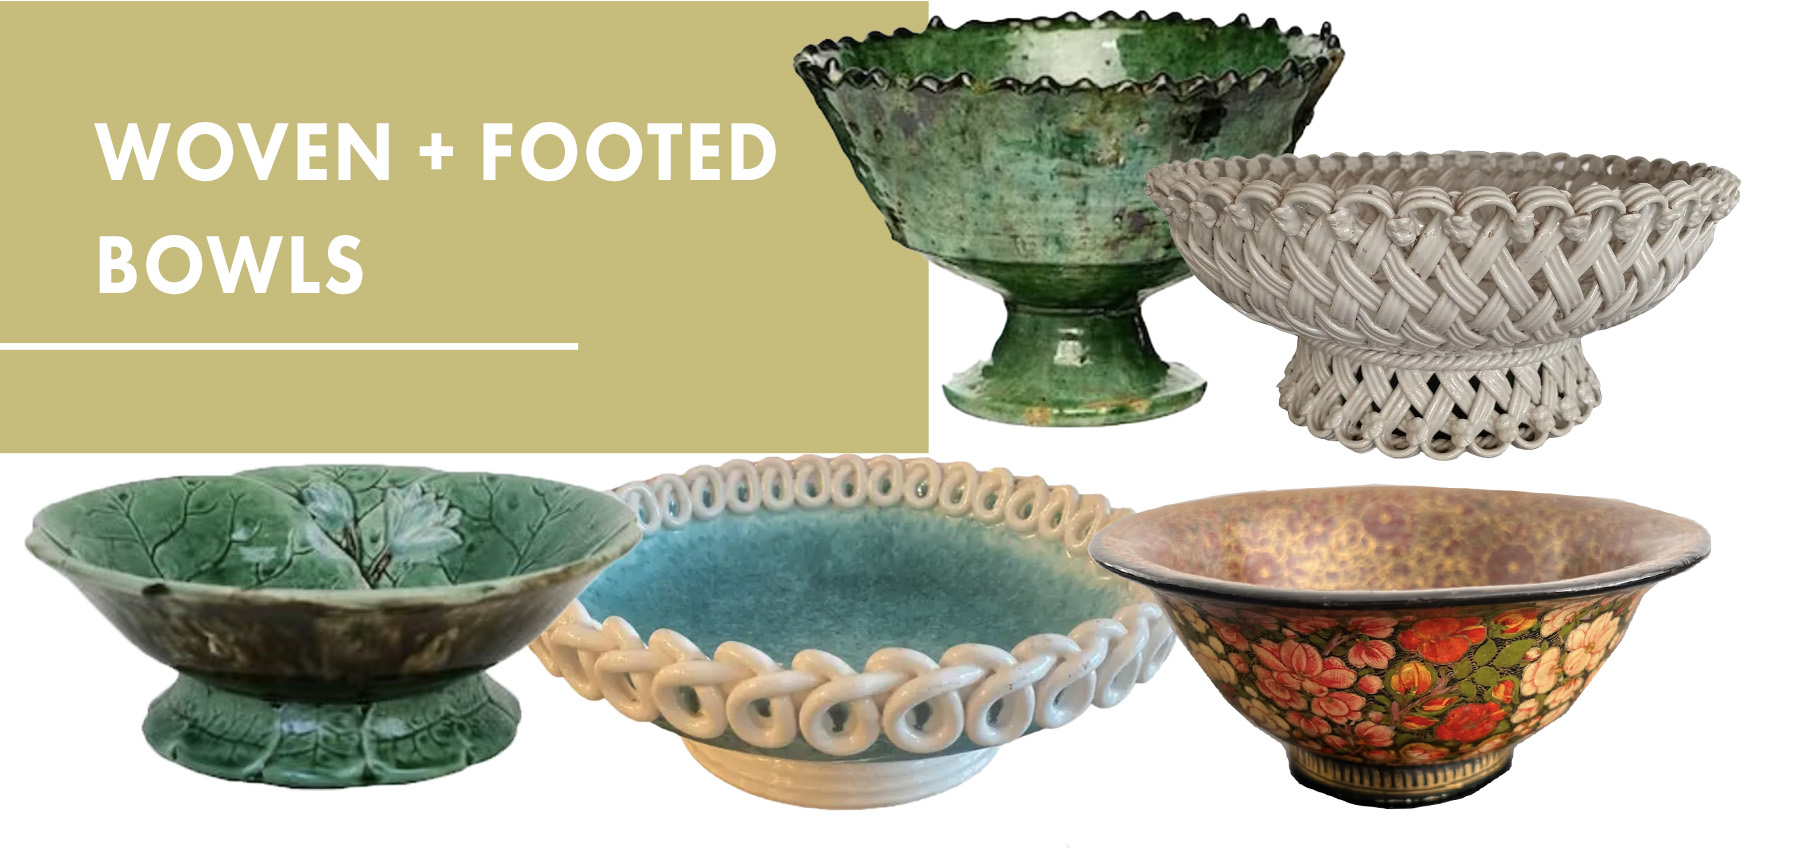 Woven + Footed Bowls